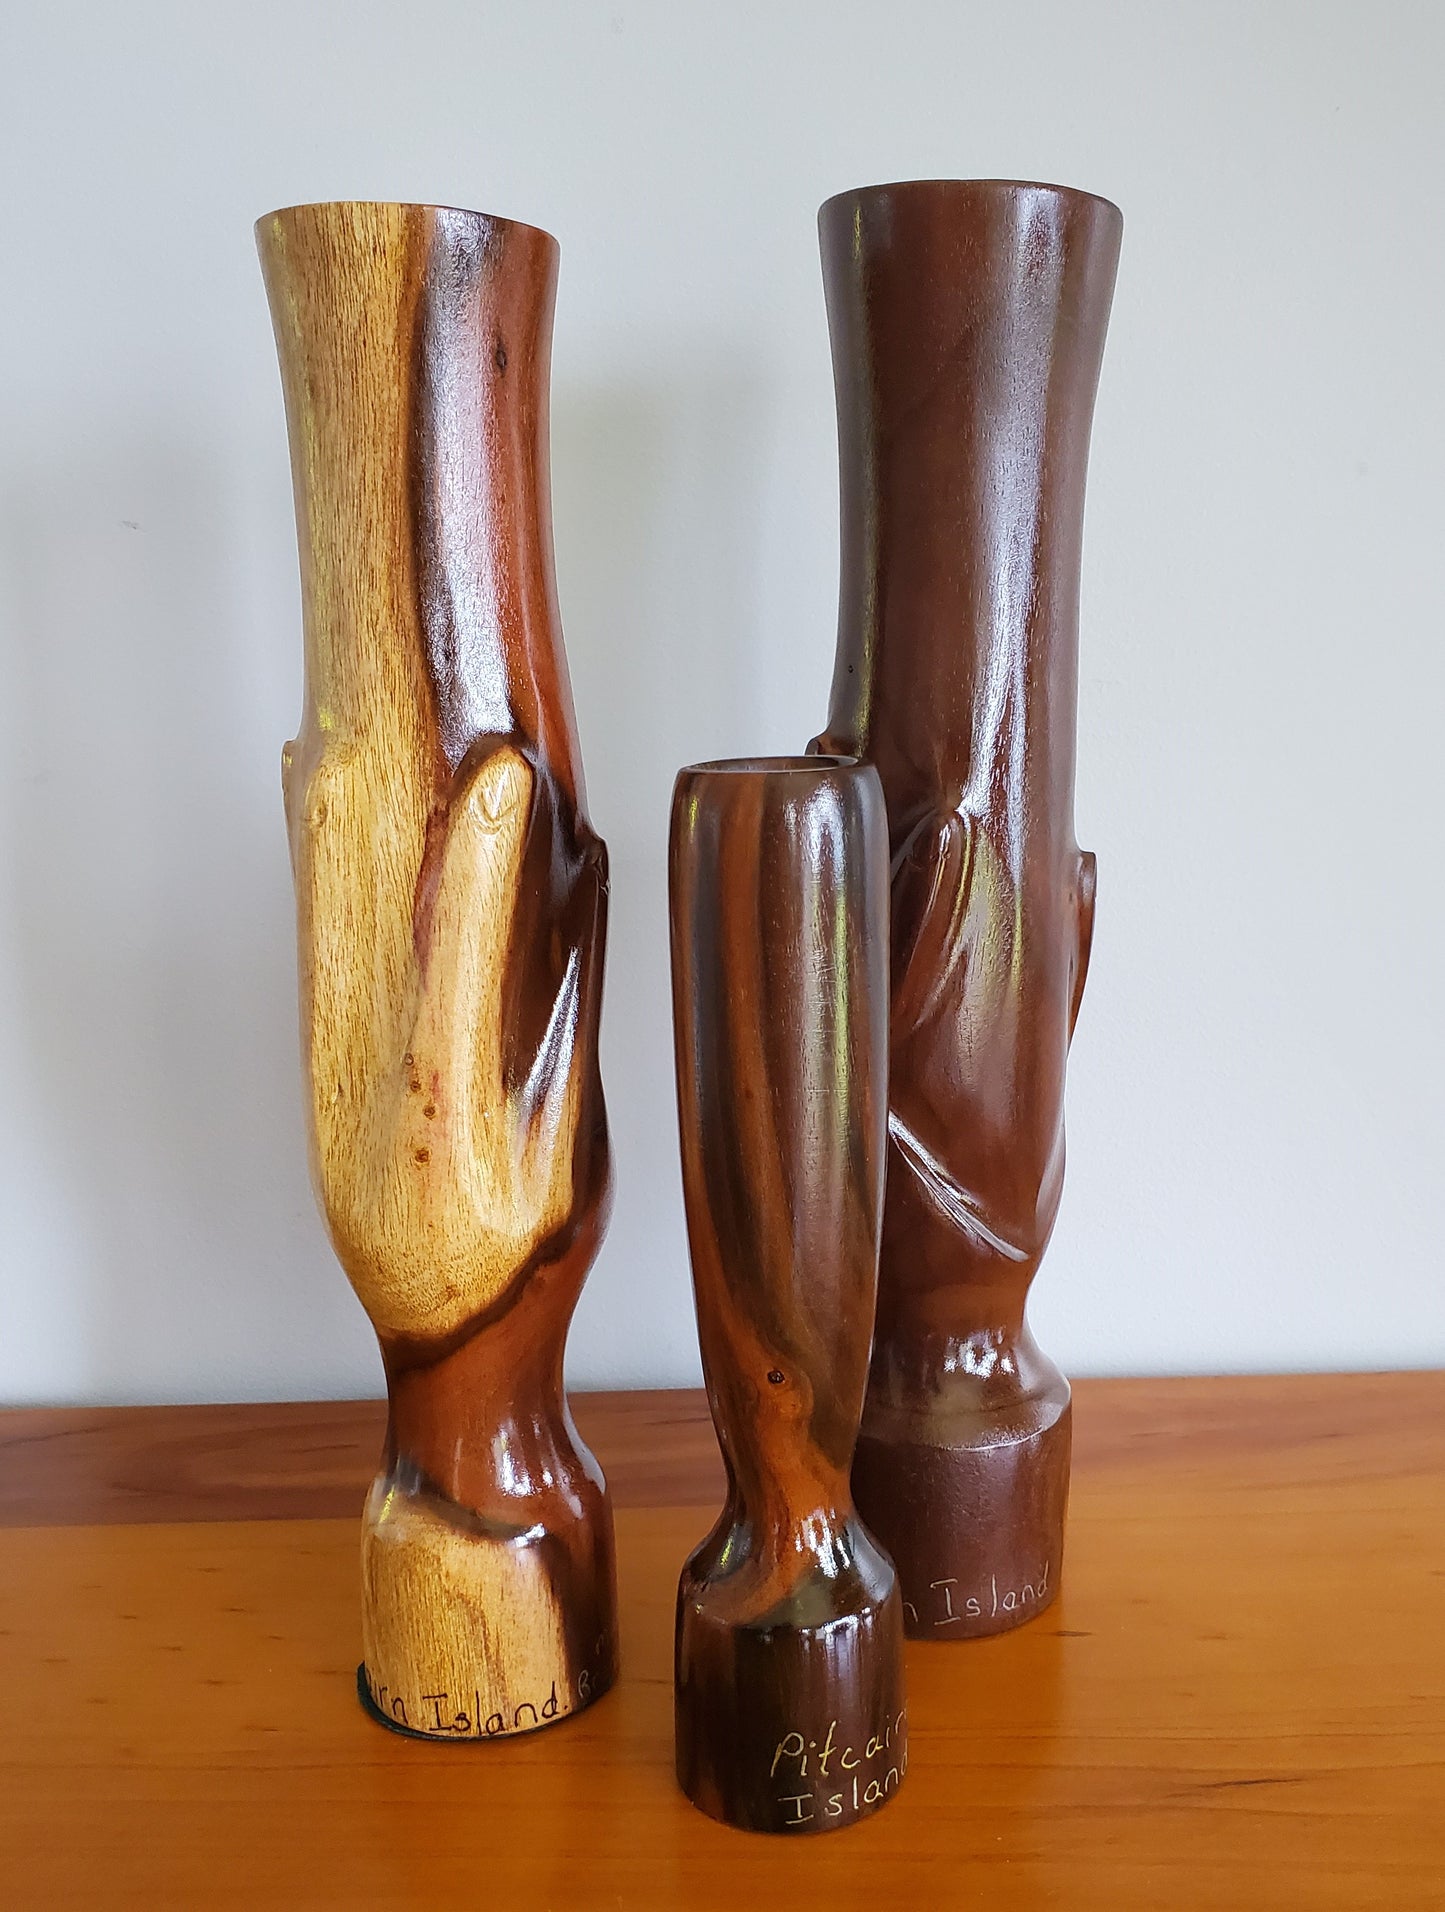 Hand carved Traditional Hand Vase from Local Miro wood - Large